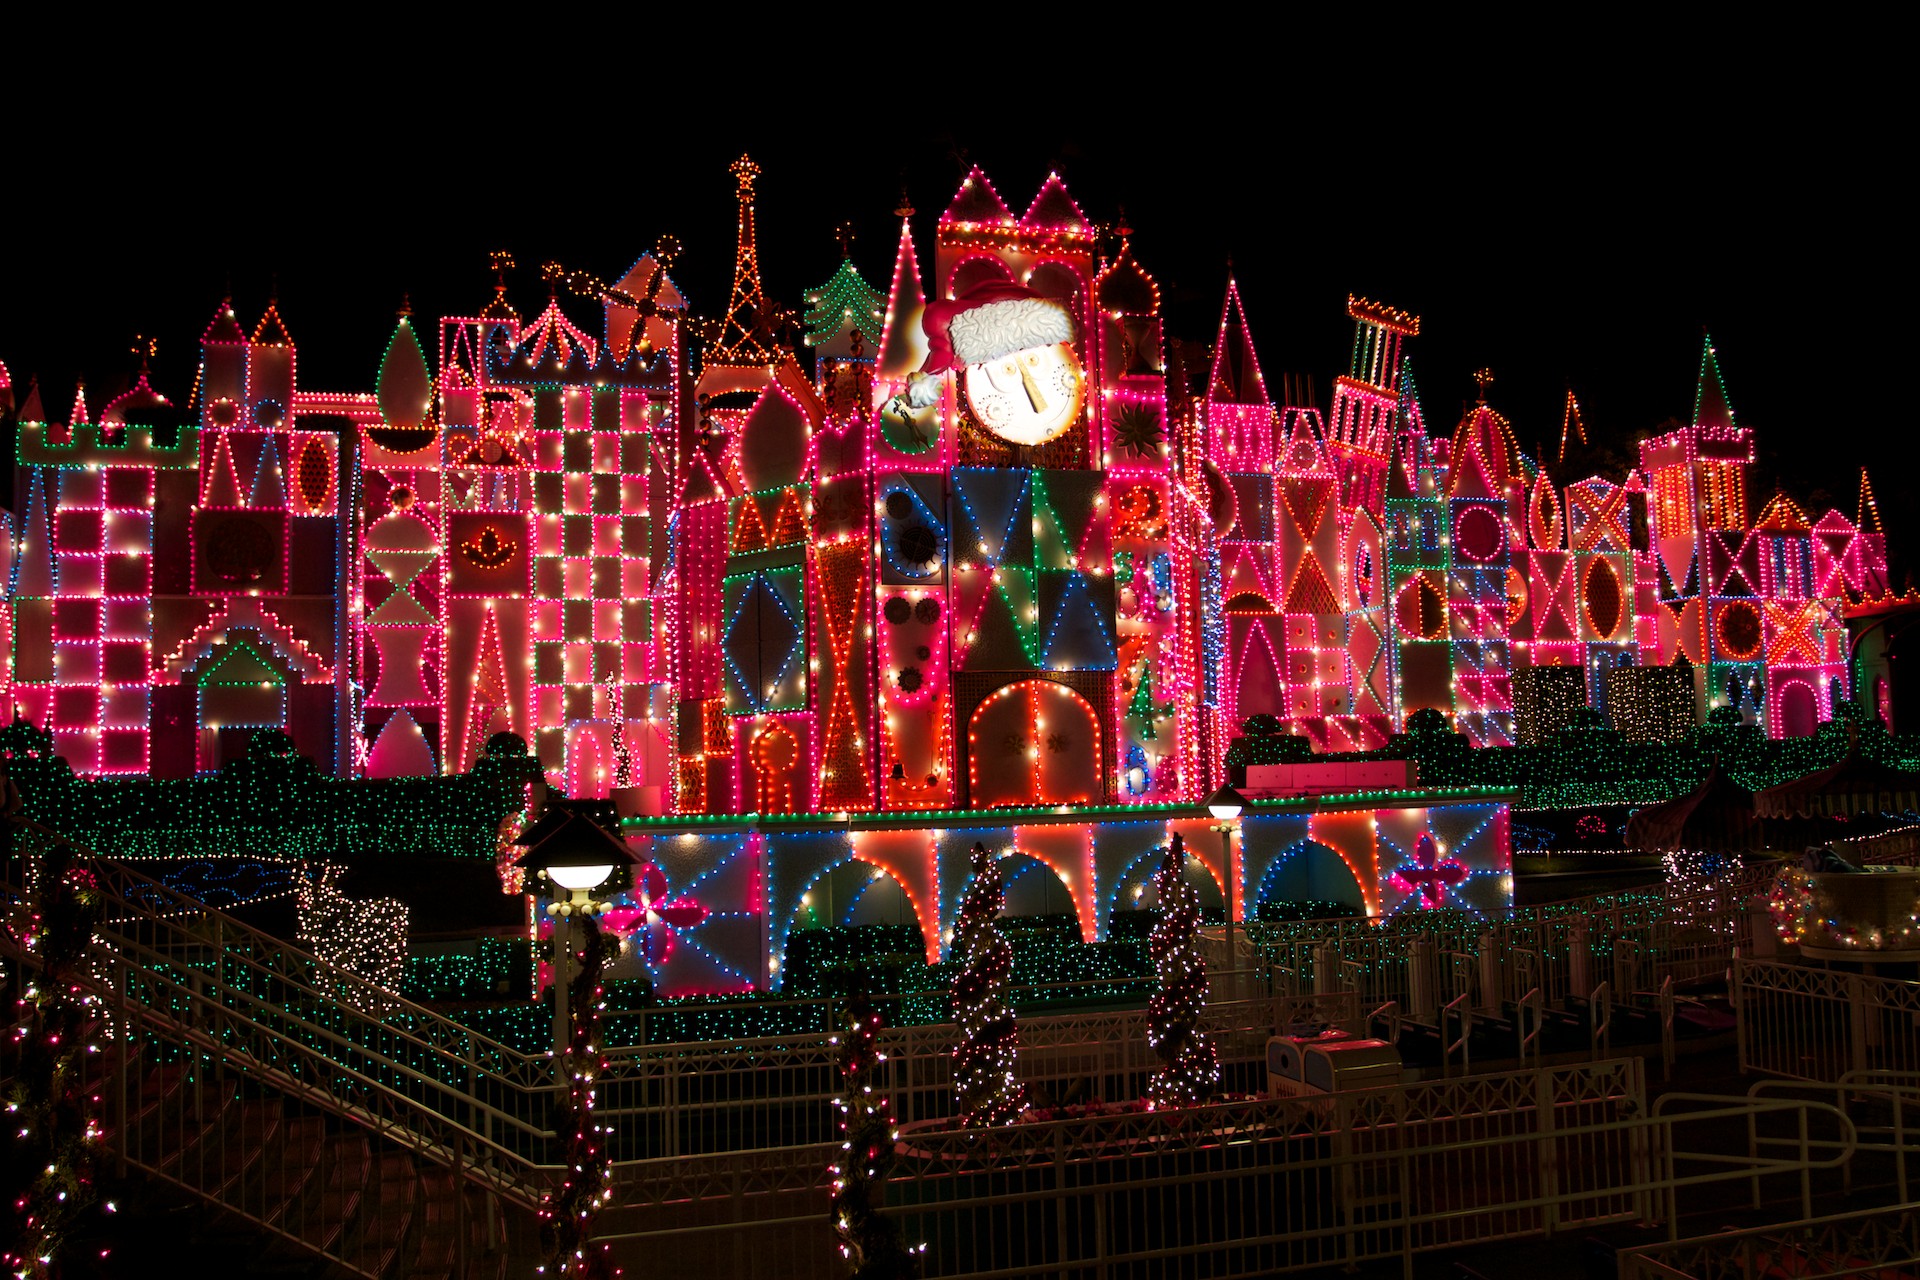 It S A Small World Attraction At Disneyland Night Decorated For